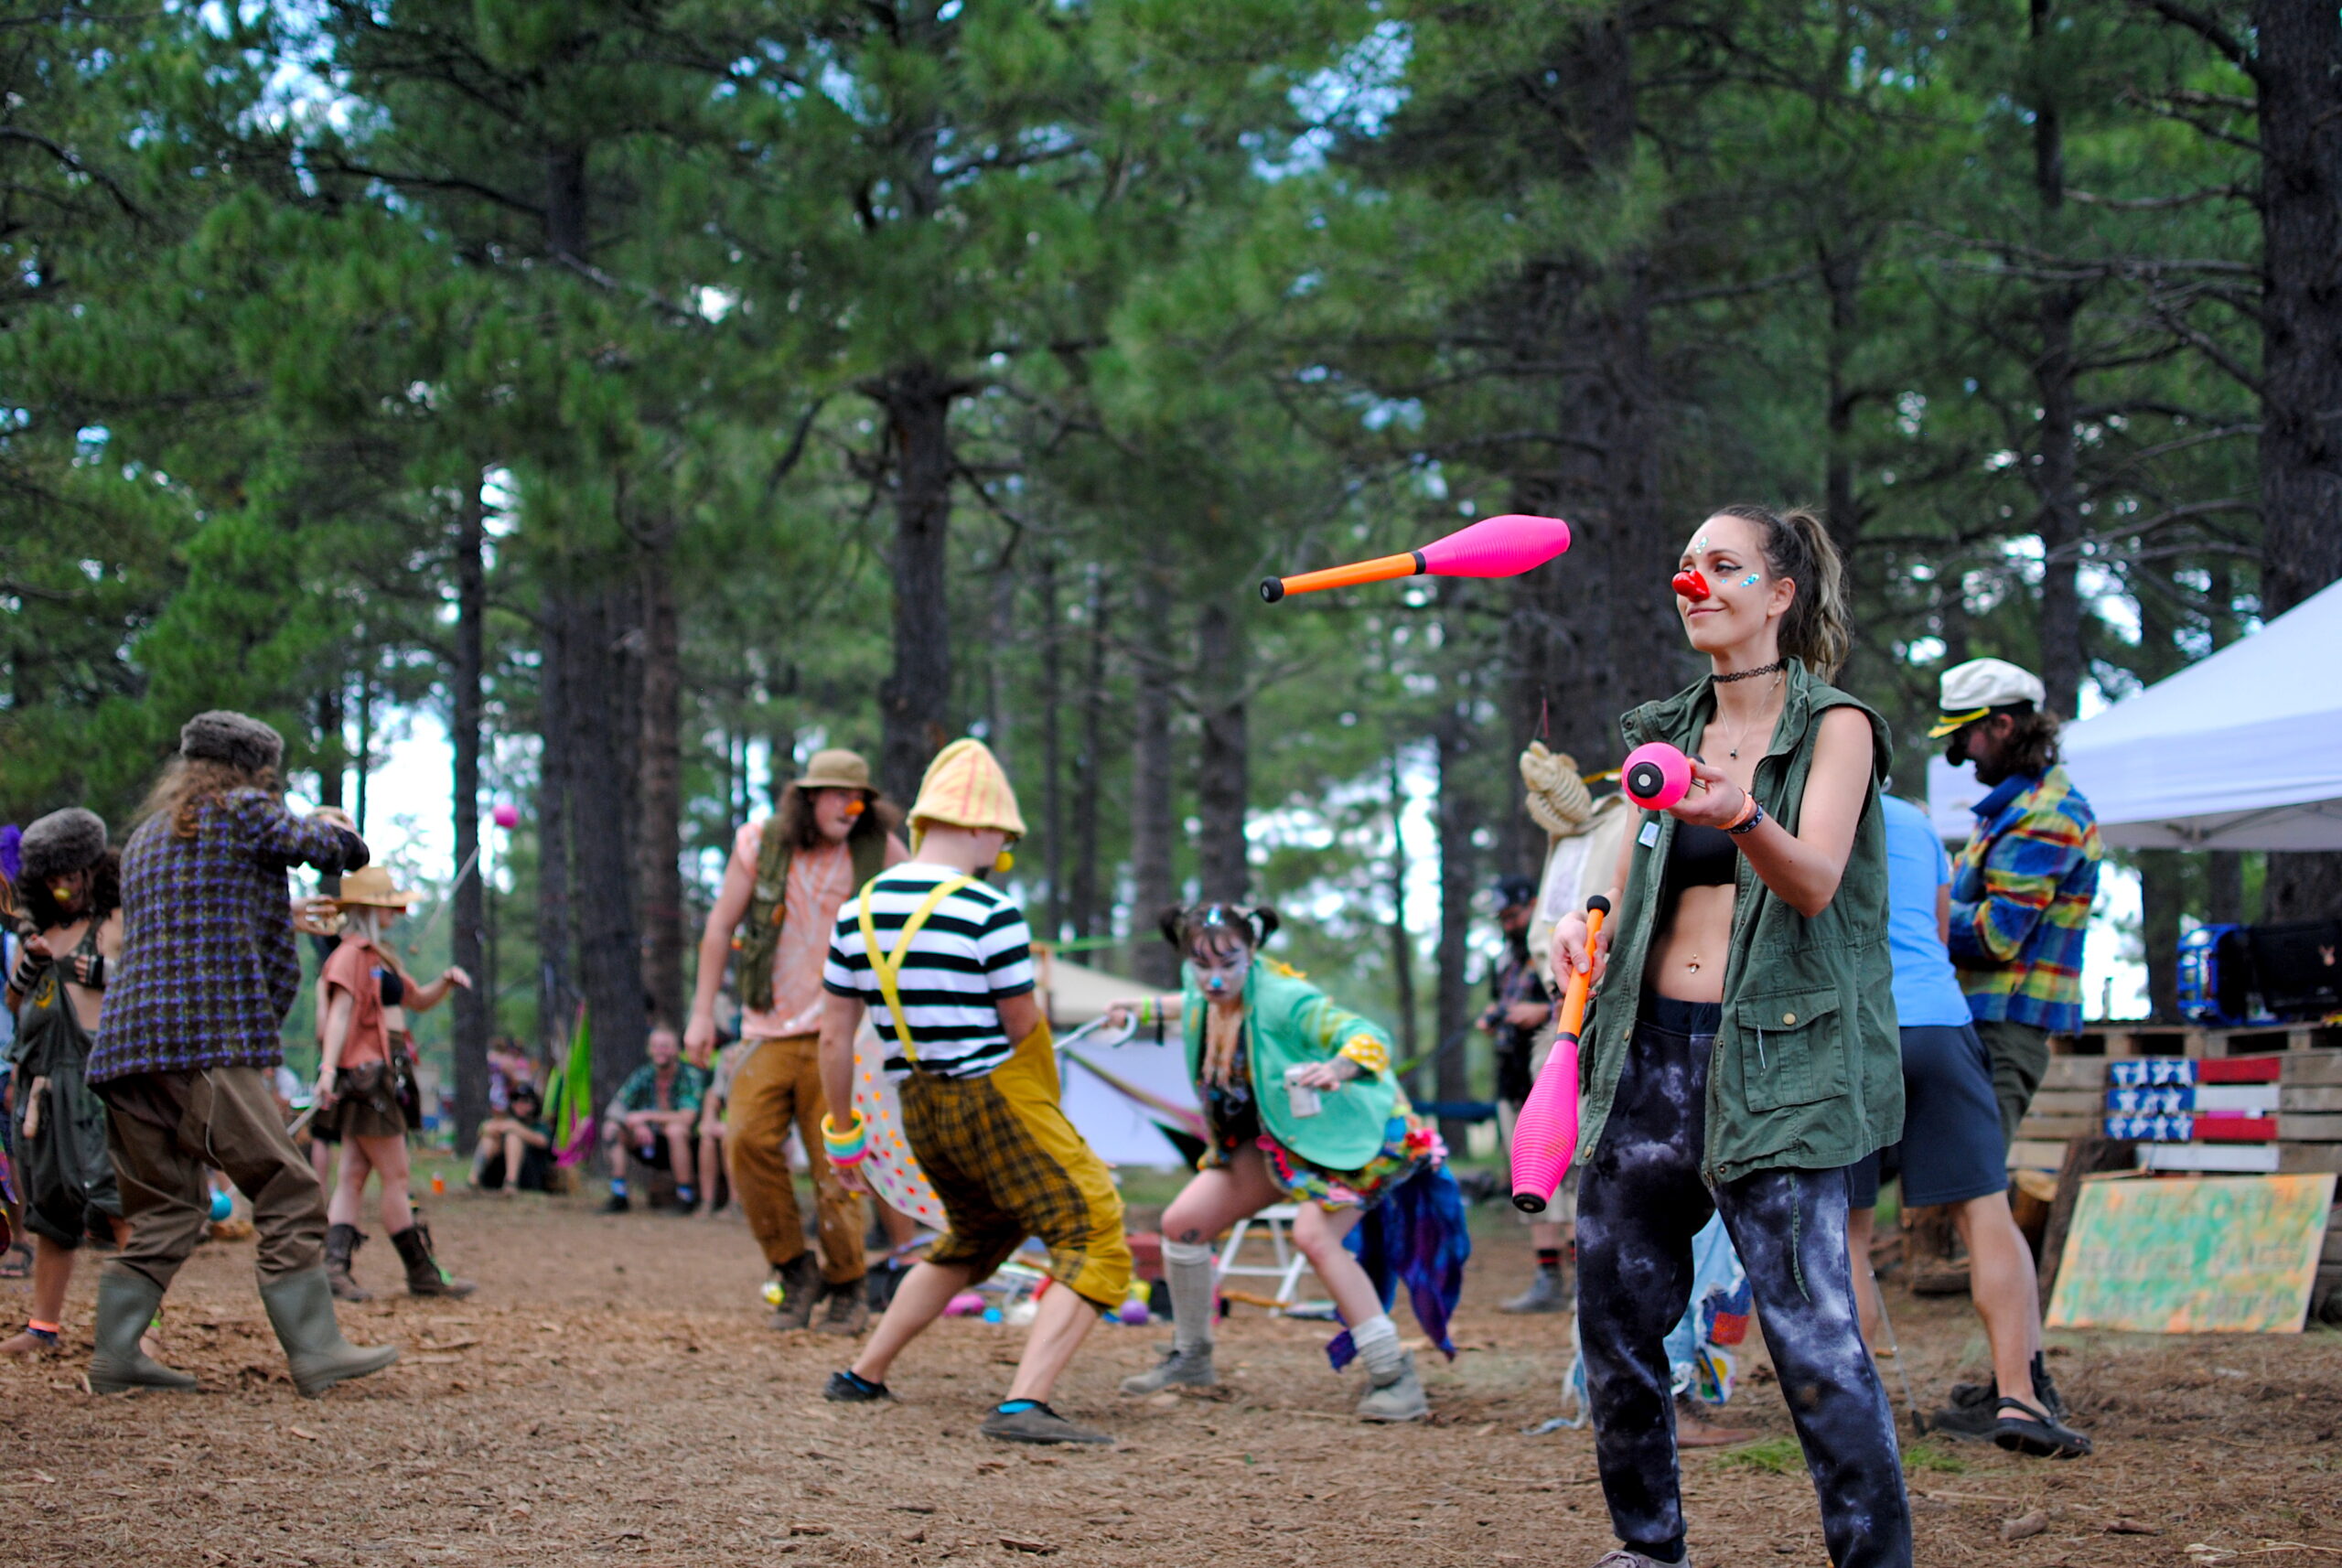 Festival-goers groove and flow among the Ponderosa Pines. Photo by: Marissa Novel.